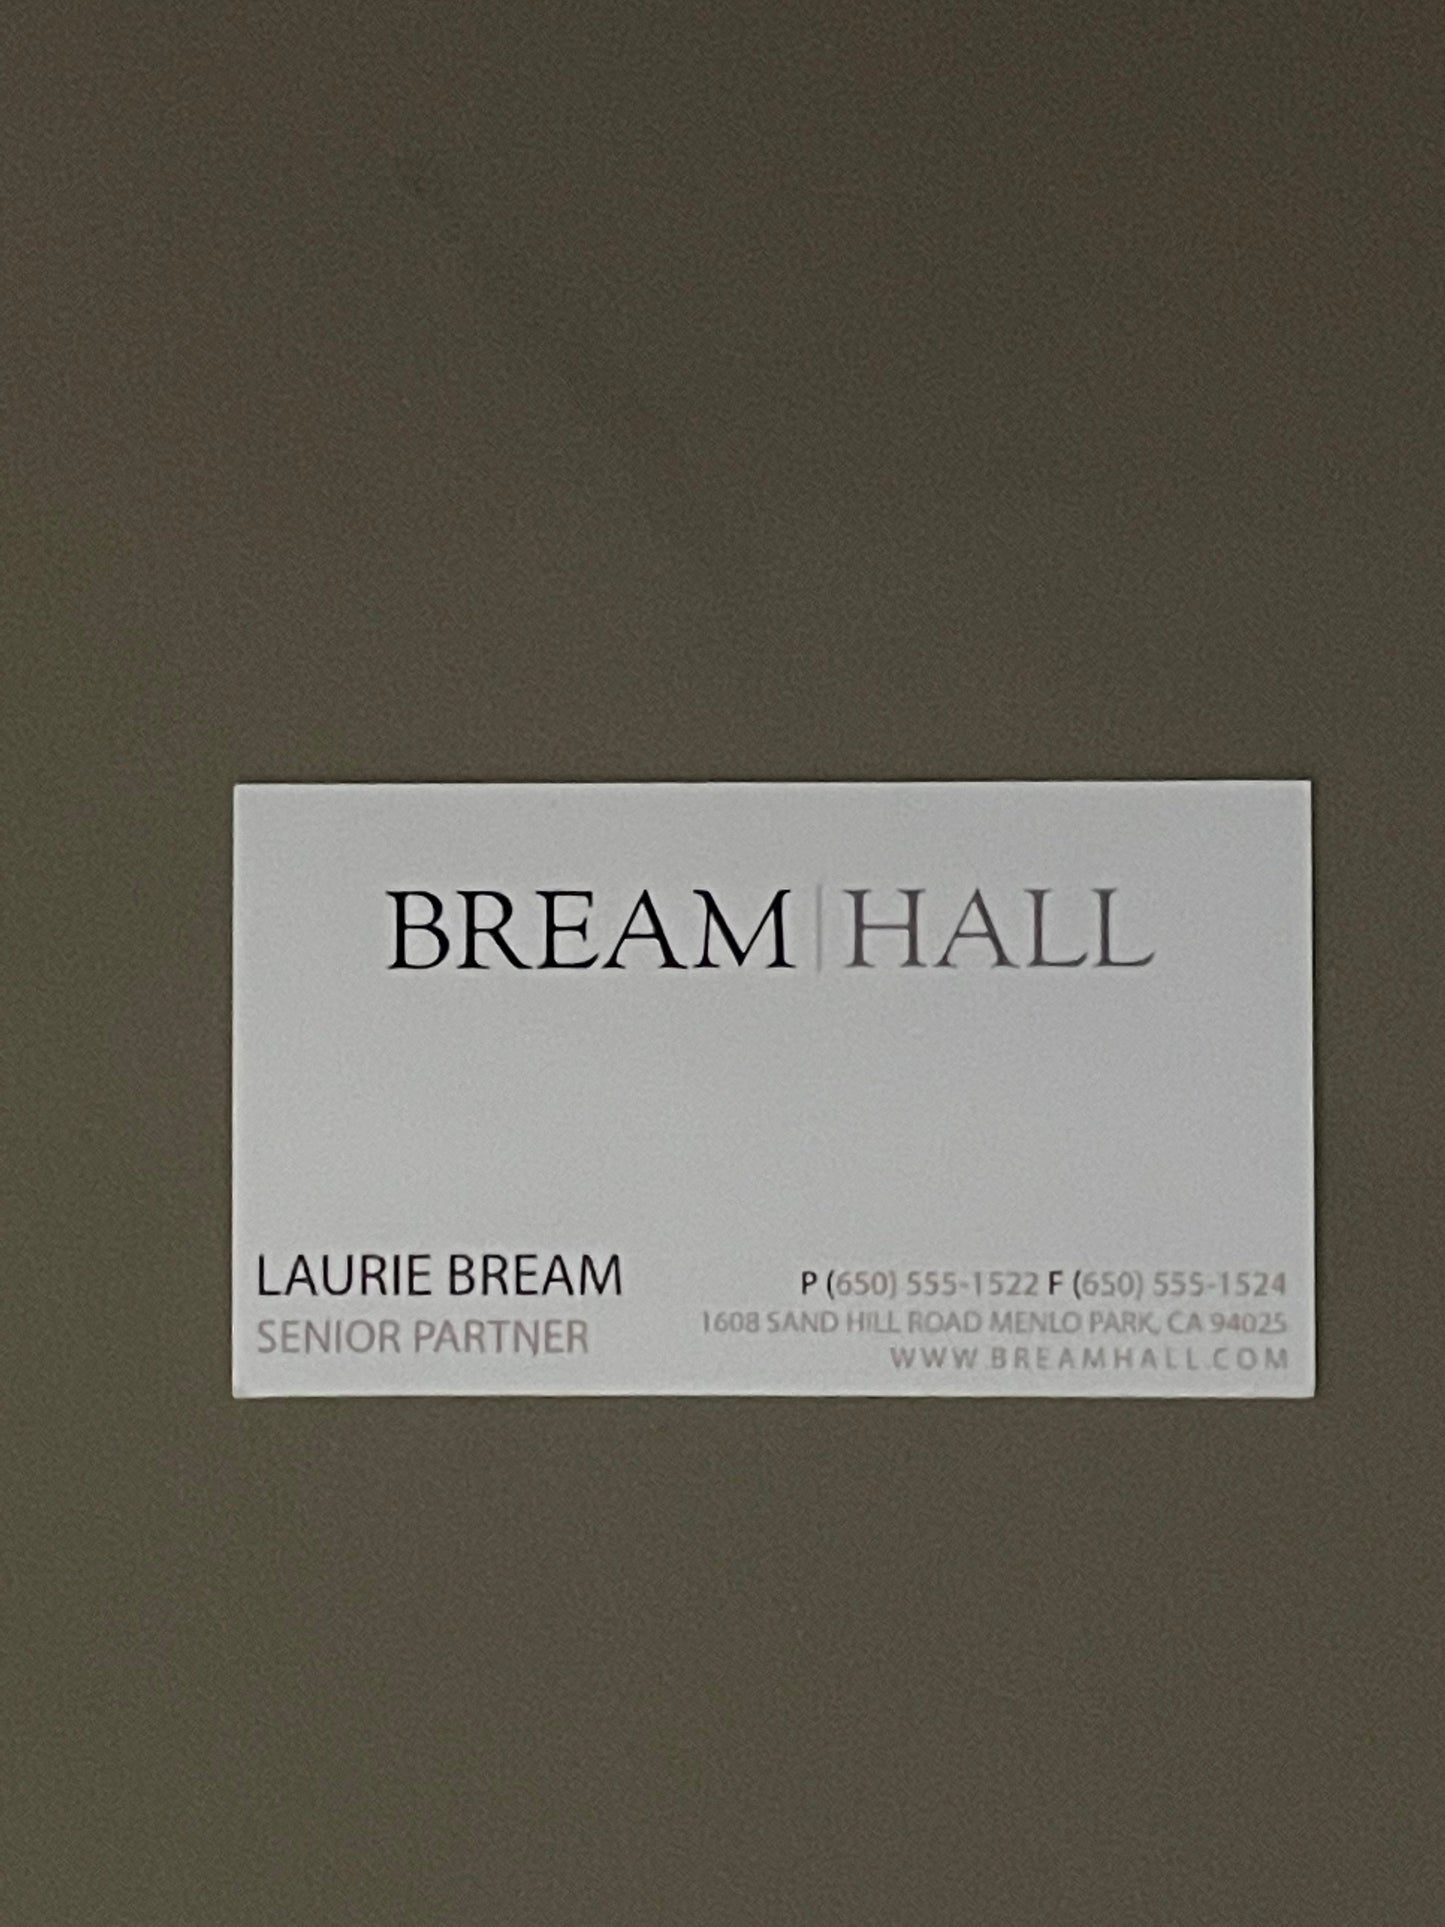 Silicon Valley: Laurie Bream's Bream Hall Senior Partner Buisness Card